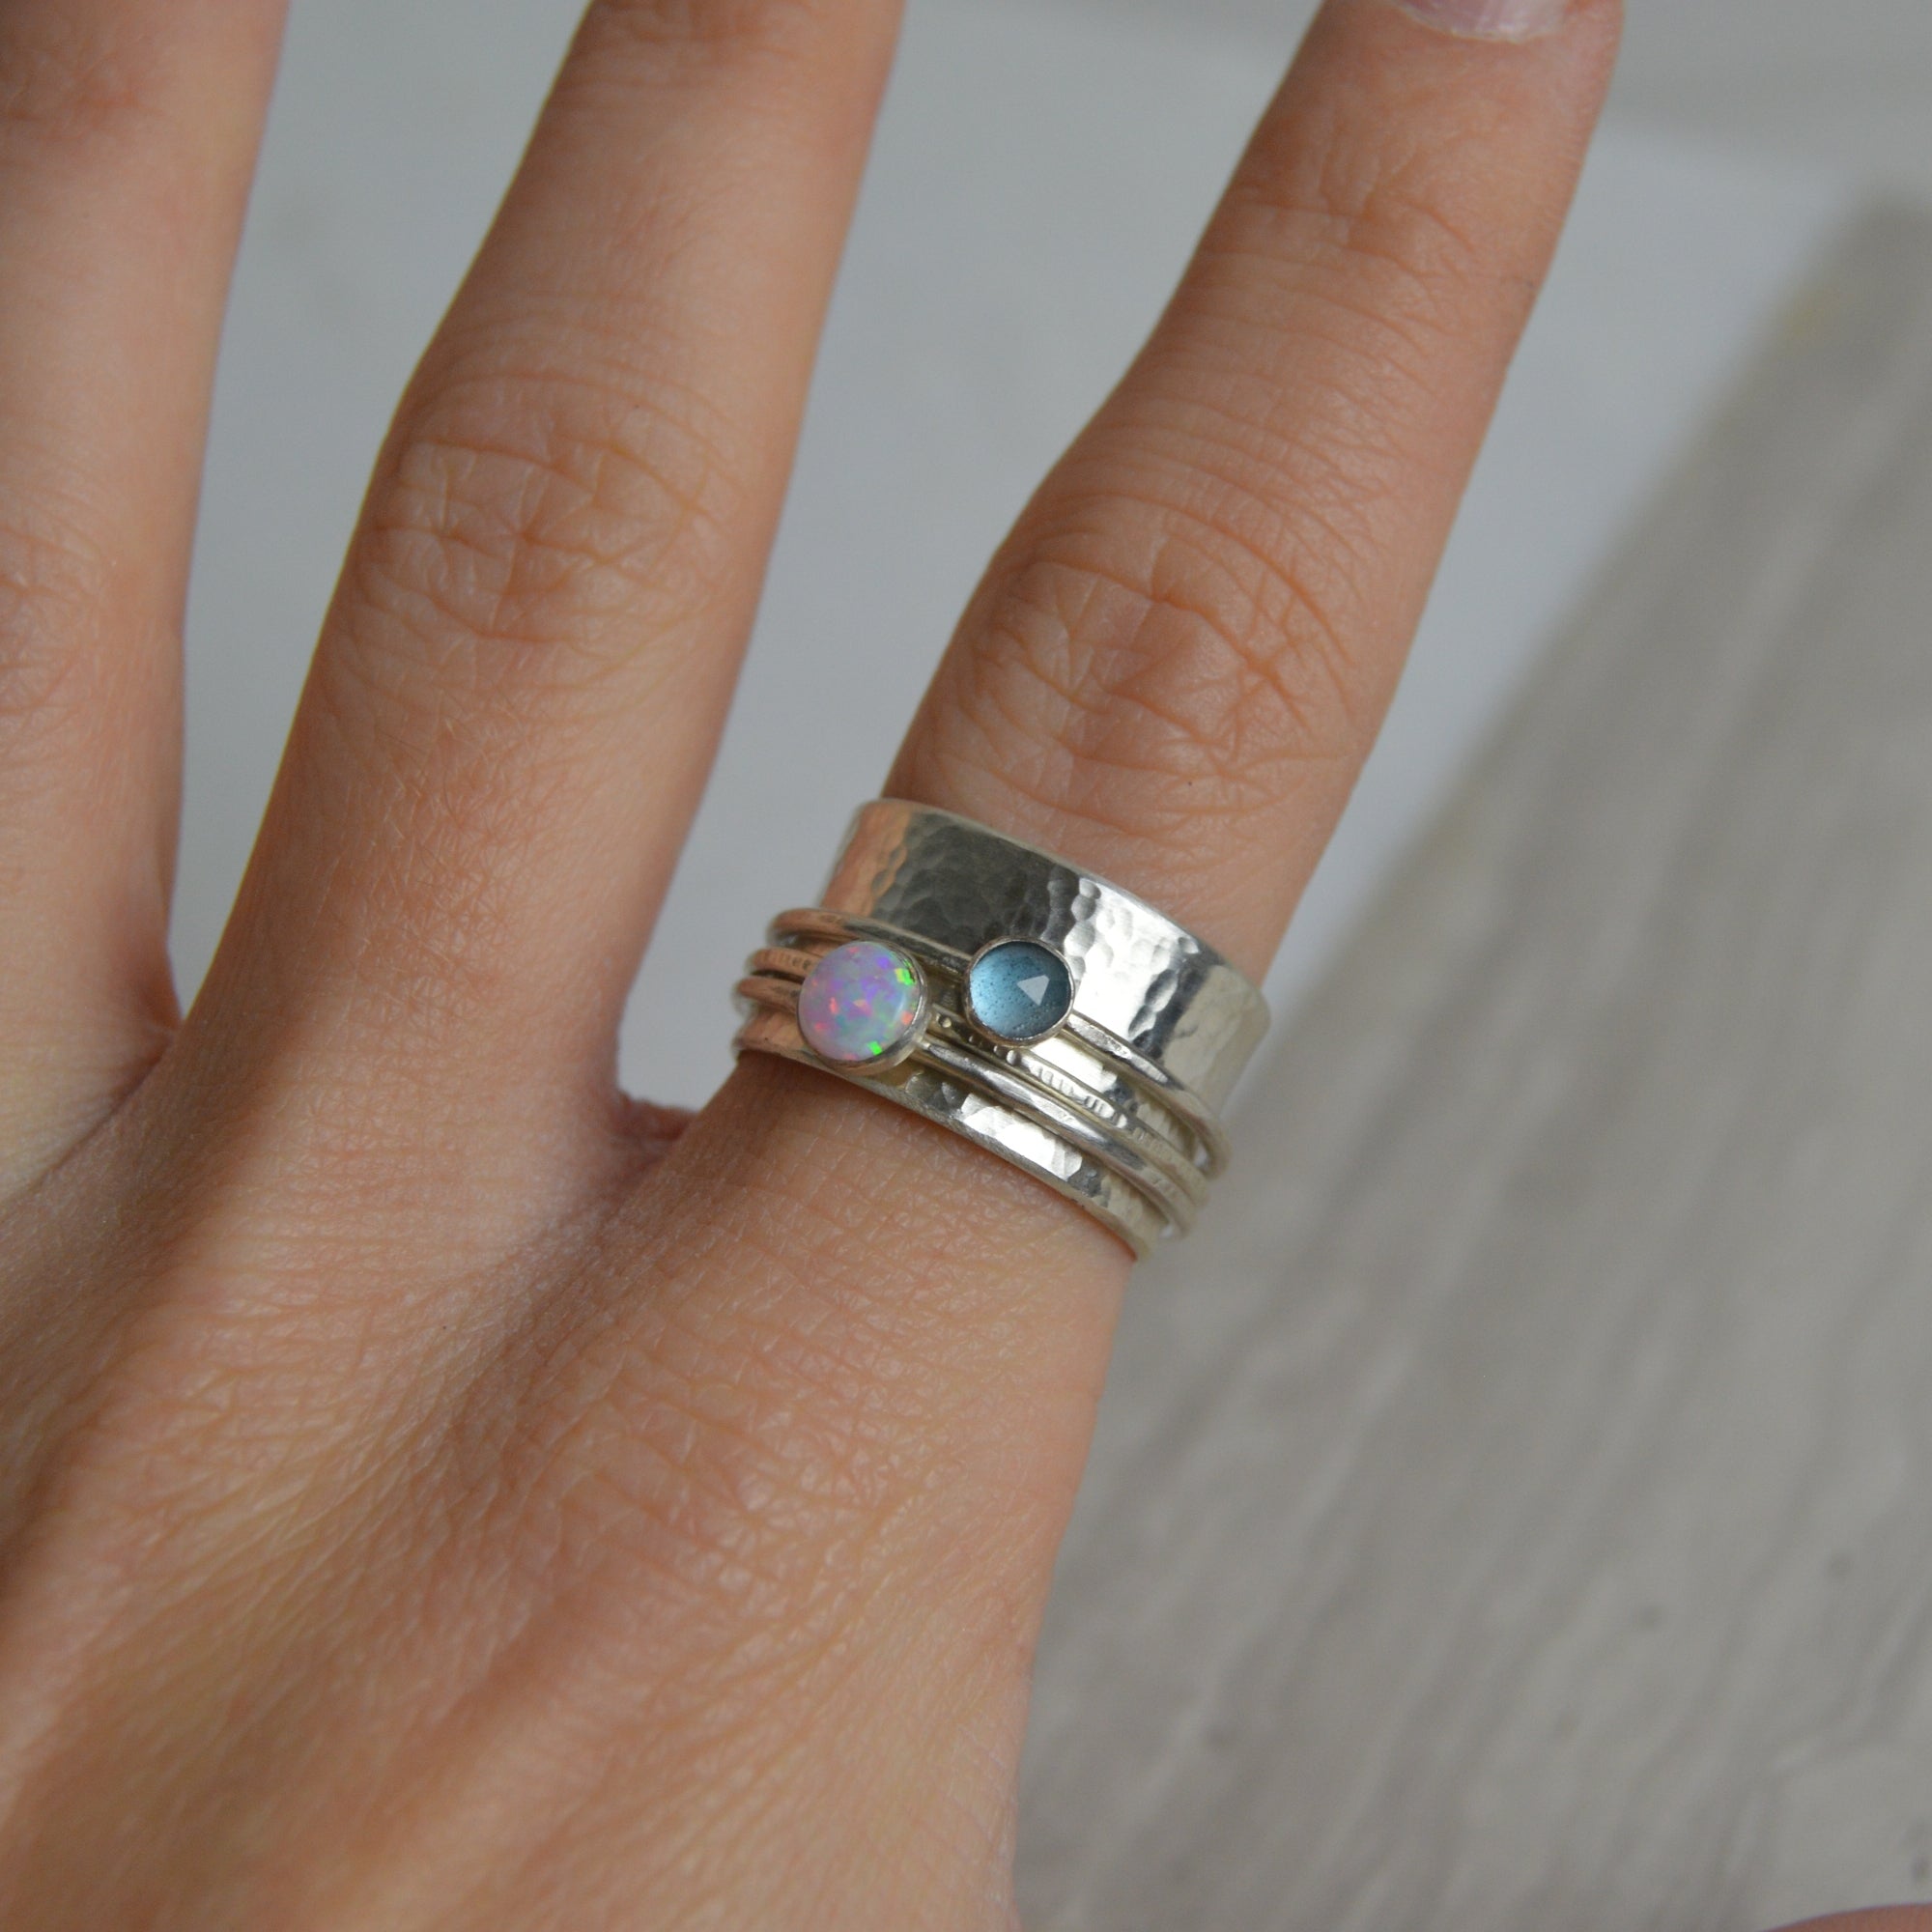 Opal & Topaz Spinning Ring - Made to order - The Nancy Smillie Shop - Art, Jewellery & Designer Gifts Glasgow